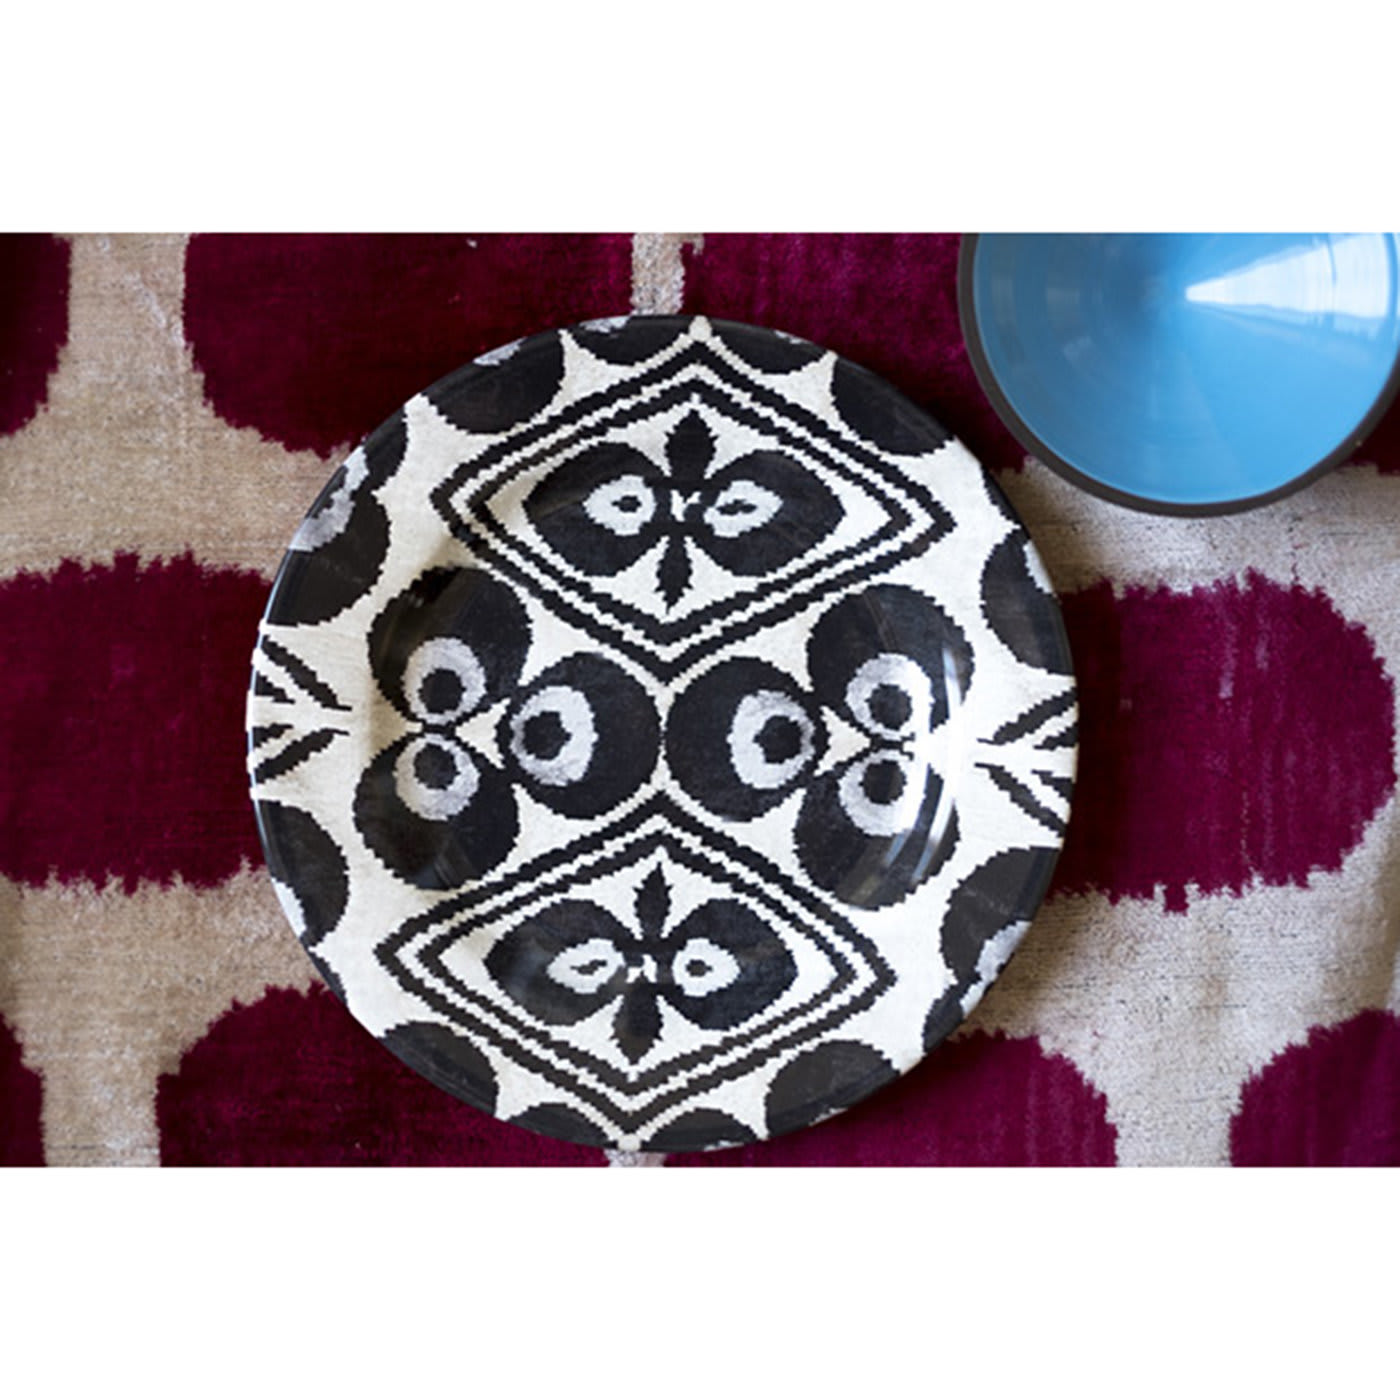 Set of 6 Ikat Glass Plates in Black and White - Les Ottomans